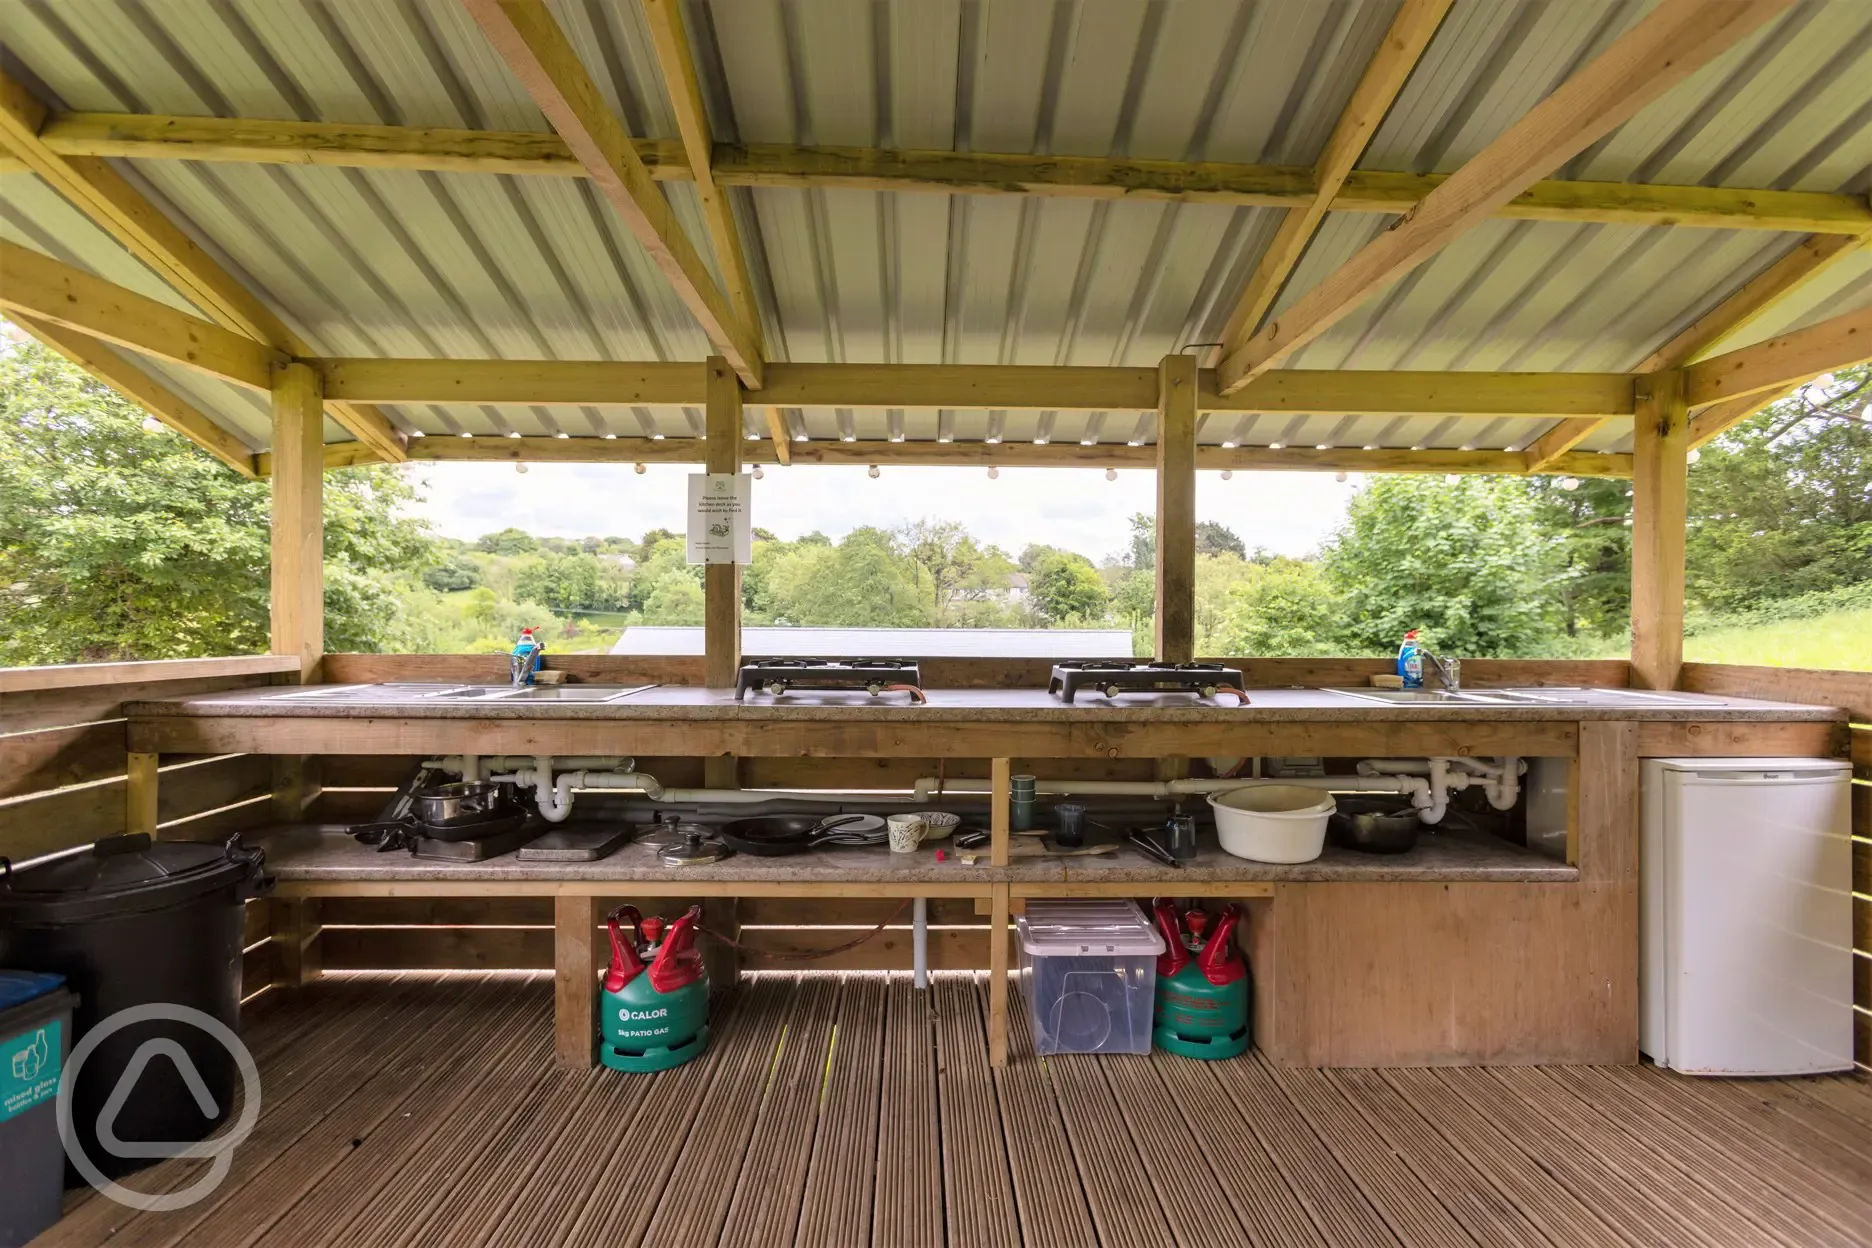 Kitchen facilities for the bell tents